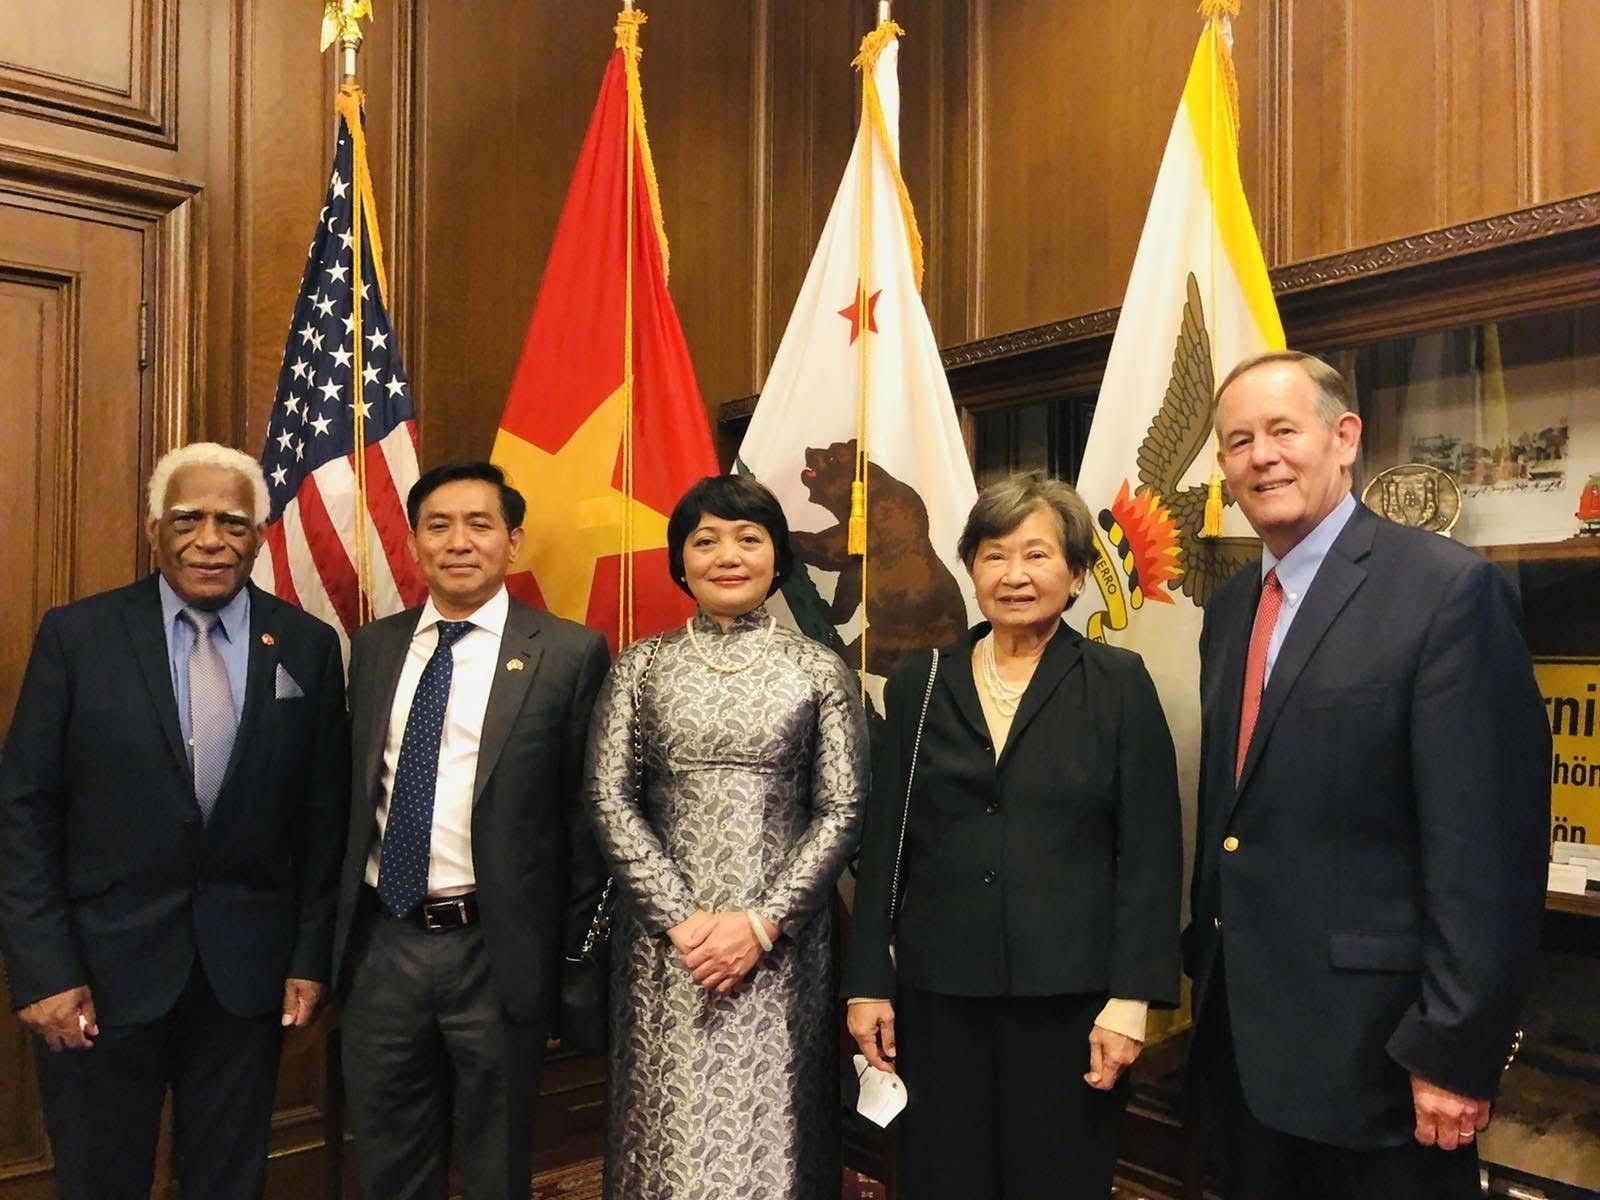 Viet Nam's delegation to UN, General Consulate in San Francisco celebrate National Day